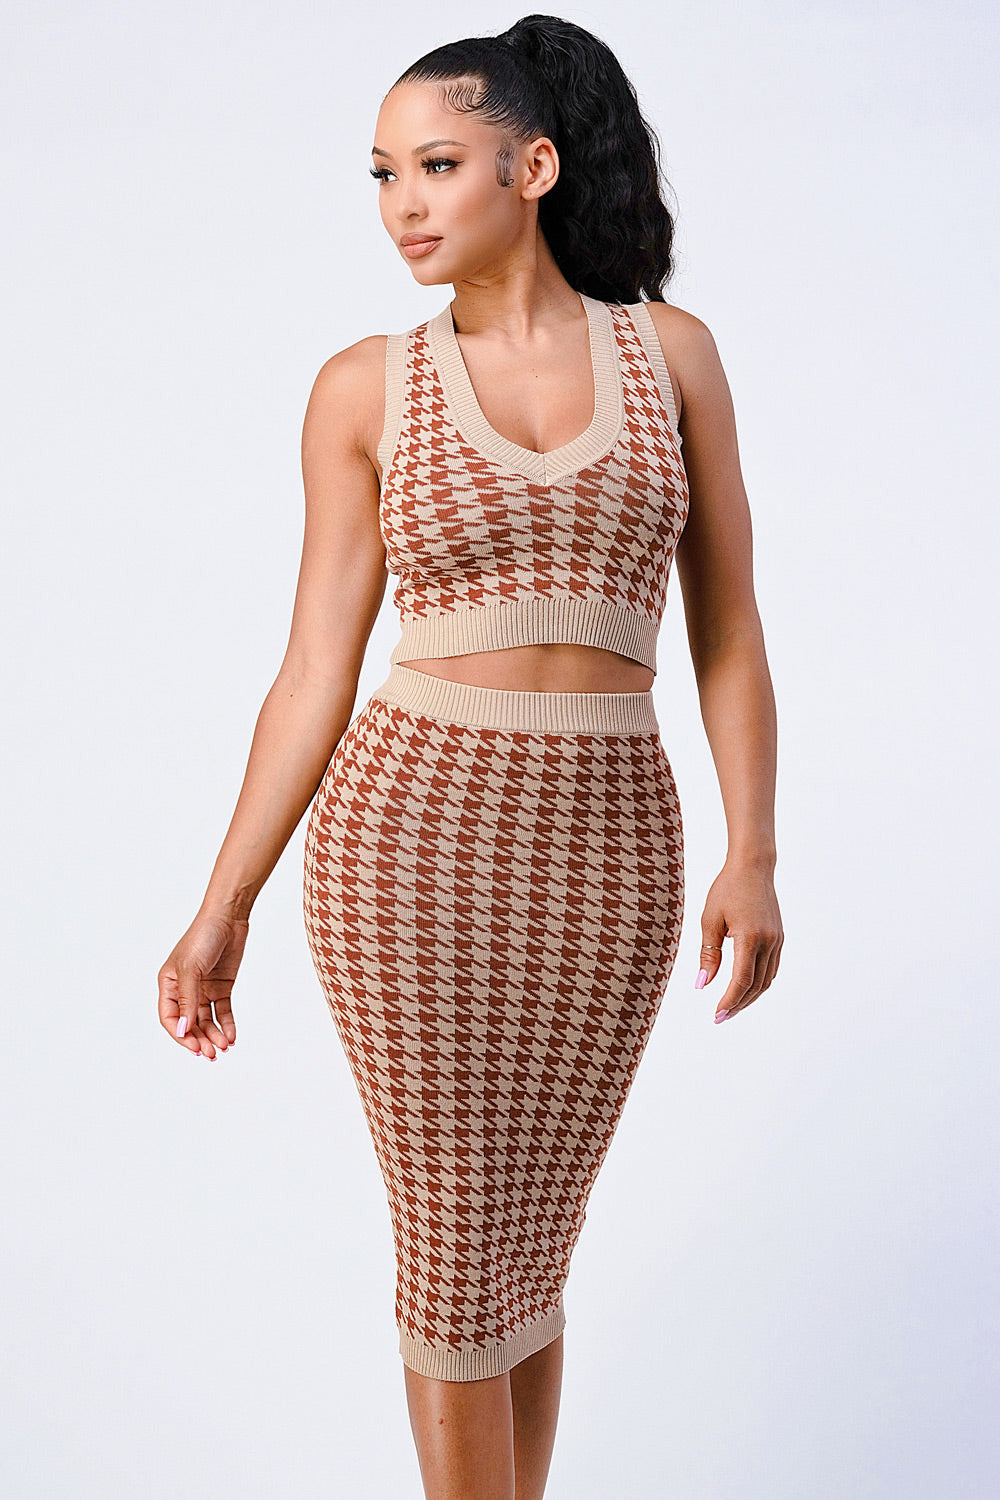 Luxe Gingham Set - CrownofCouture